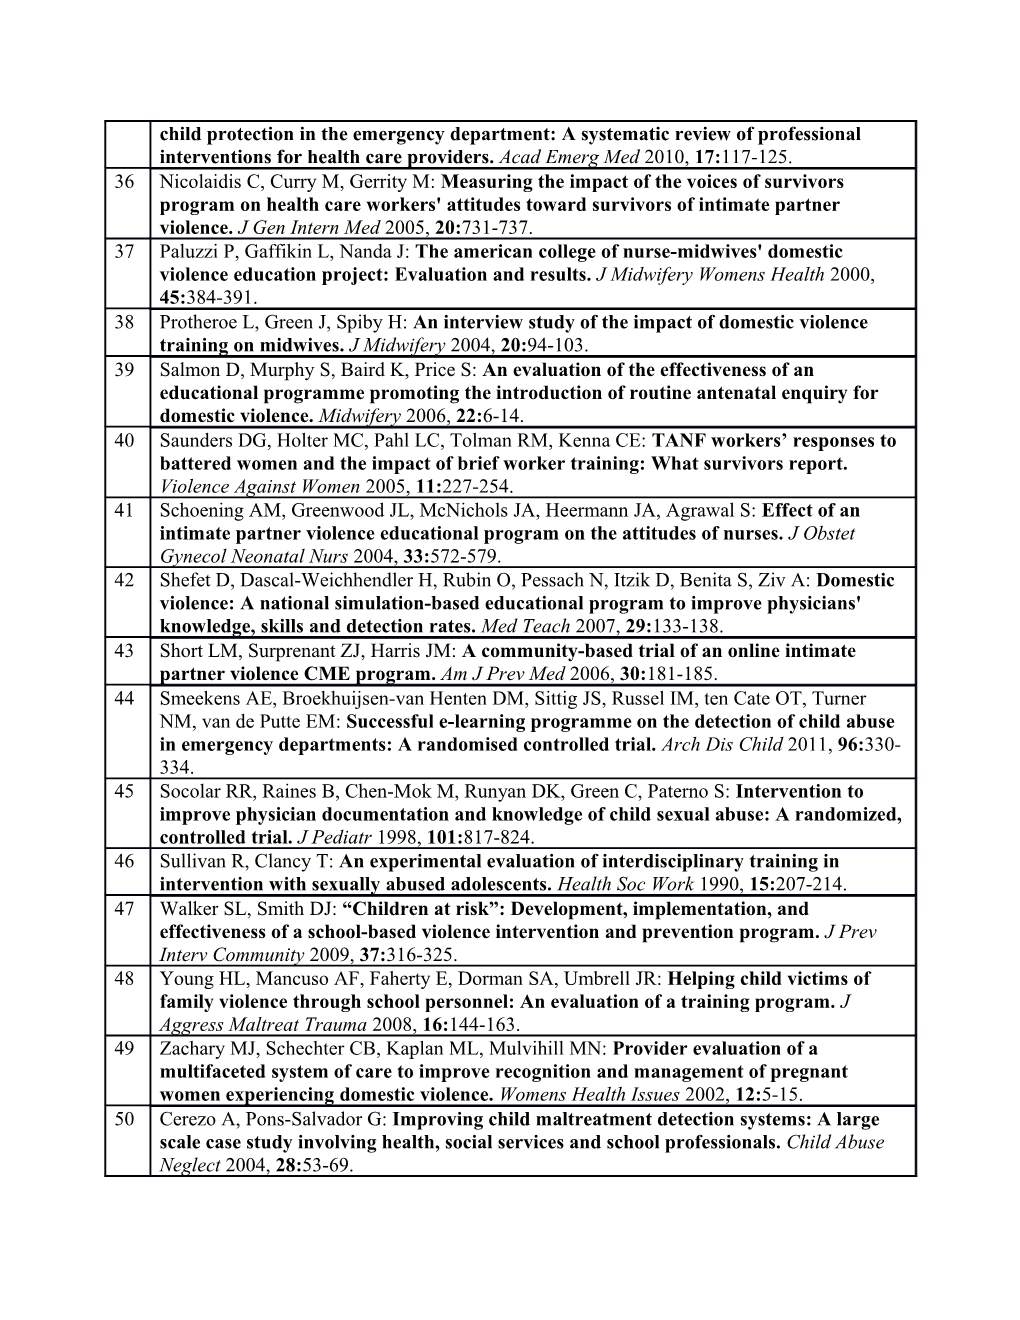 Additional File 2: Reference List of All 62 Articles Included in Review